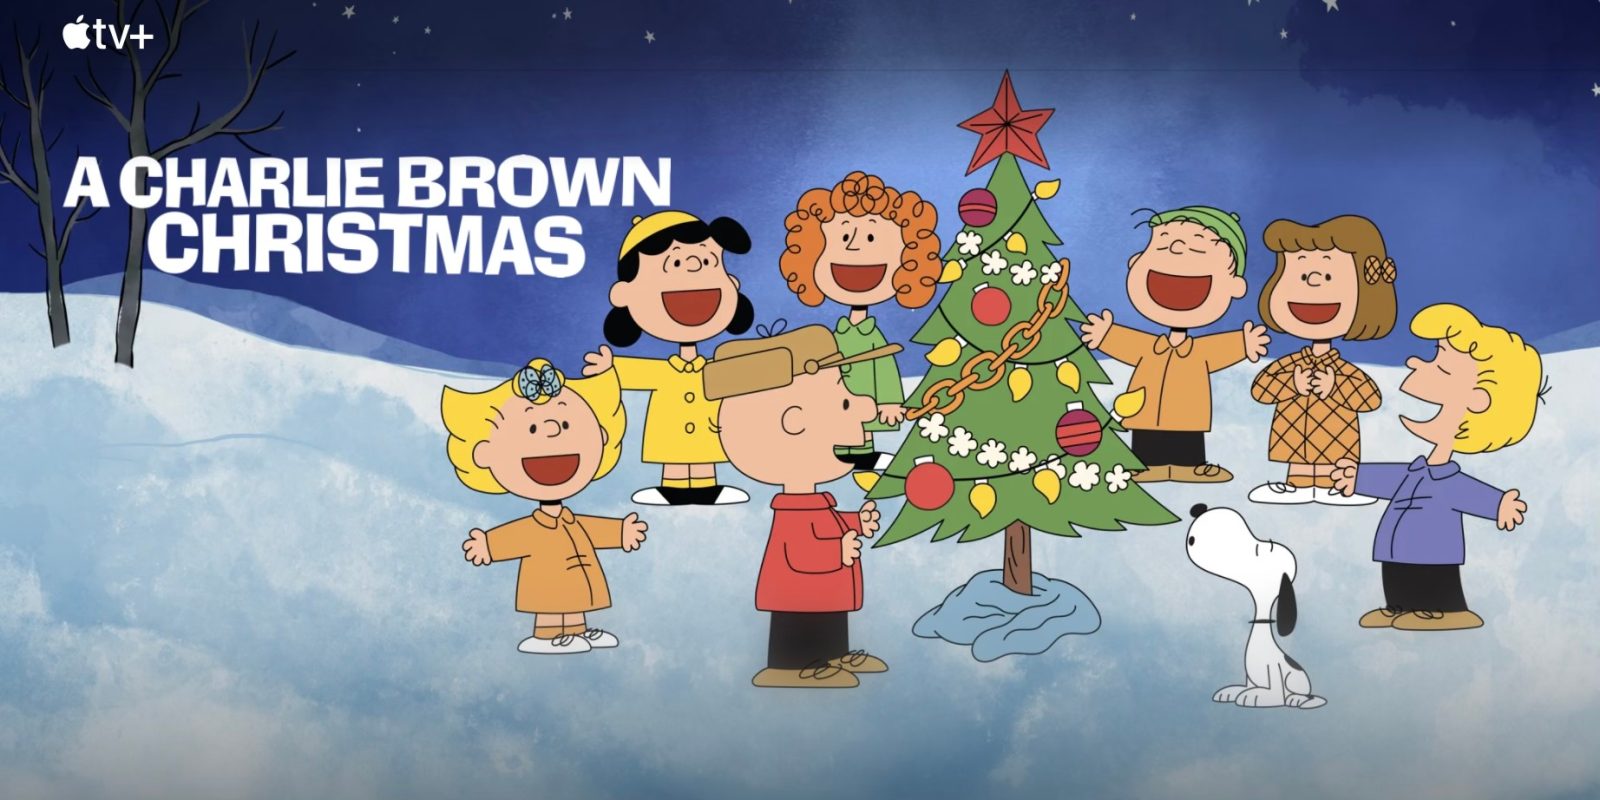 How to watch Charlie Brown holiday specials Charlie Brown Christmas